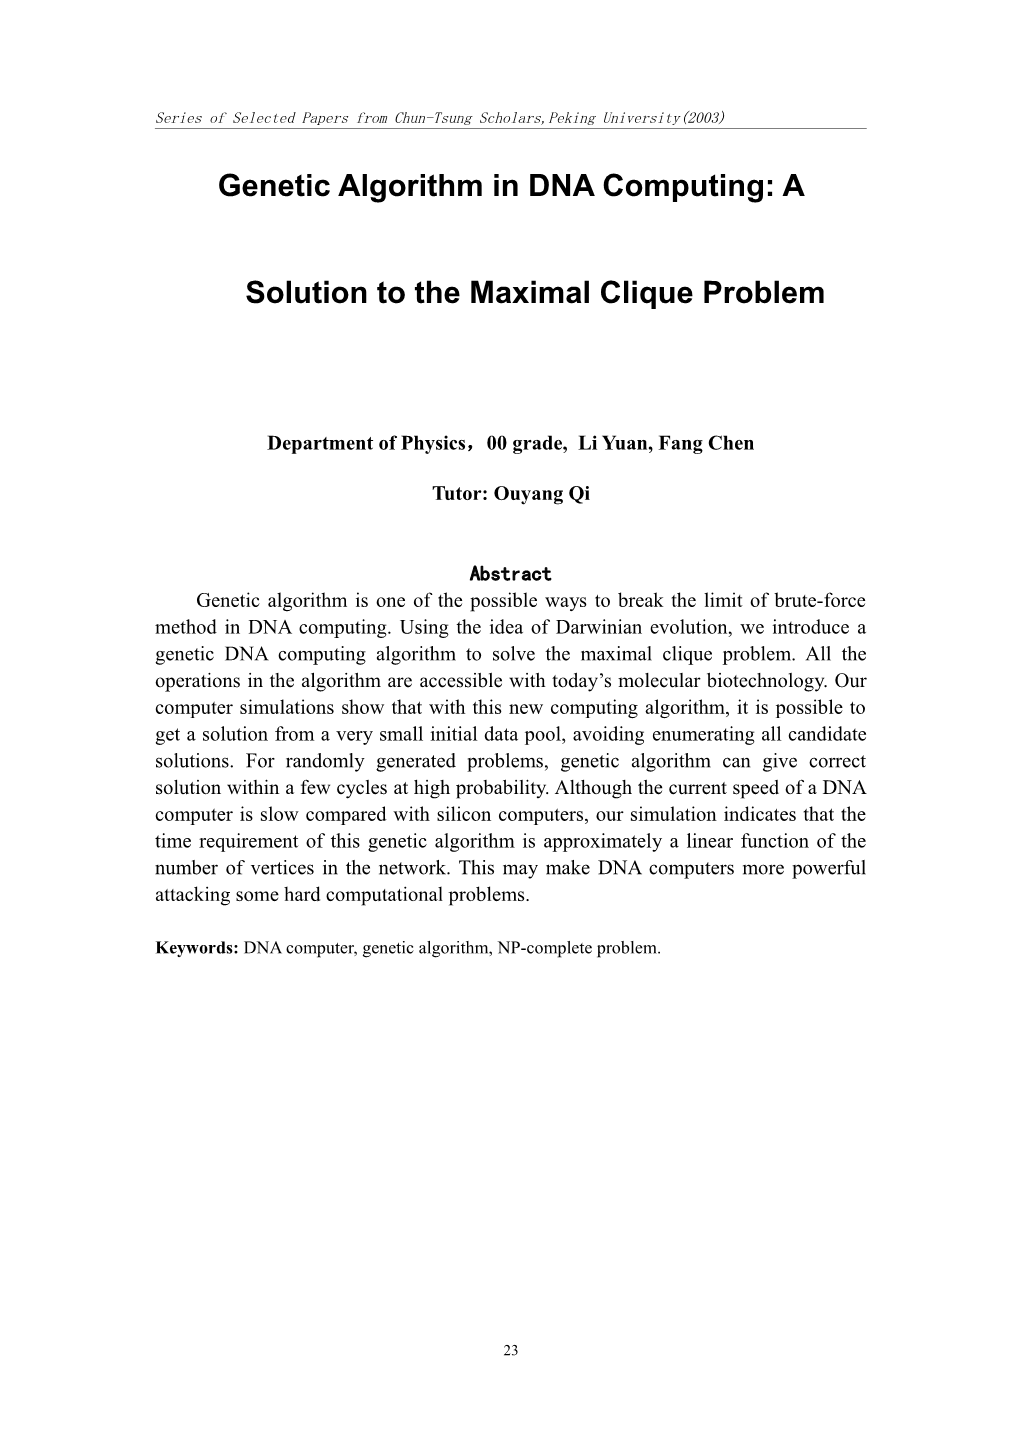 Simulated DNA Solutions of Genetic Algorithm to the Maximal Clique Problem